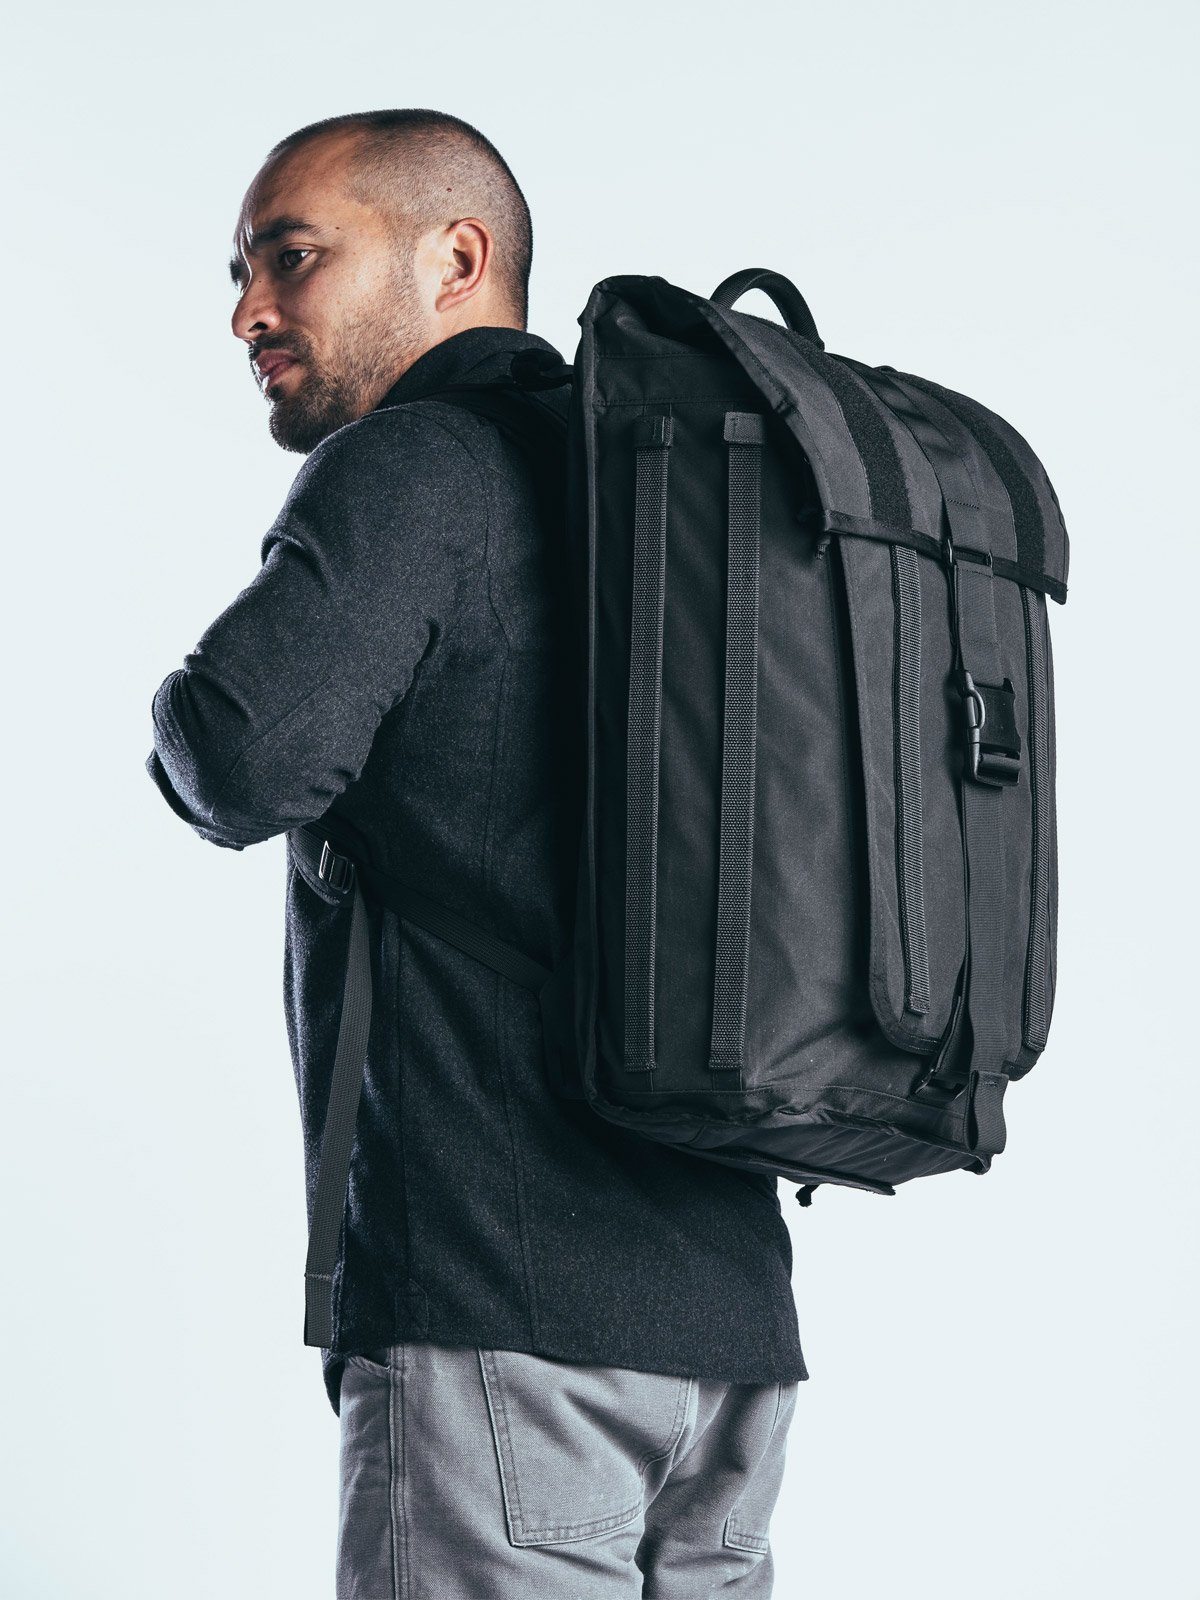 Radian by Mission Workshop - Weatherproof Bags & Technical Apparel - San Francisco & Los Angeles - Built to endure - Guaranteed forever